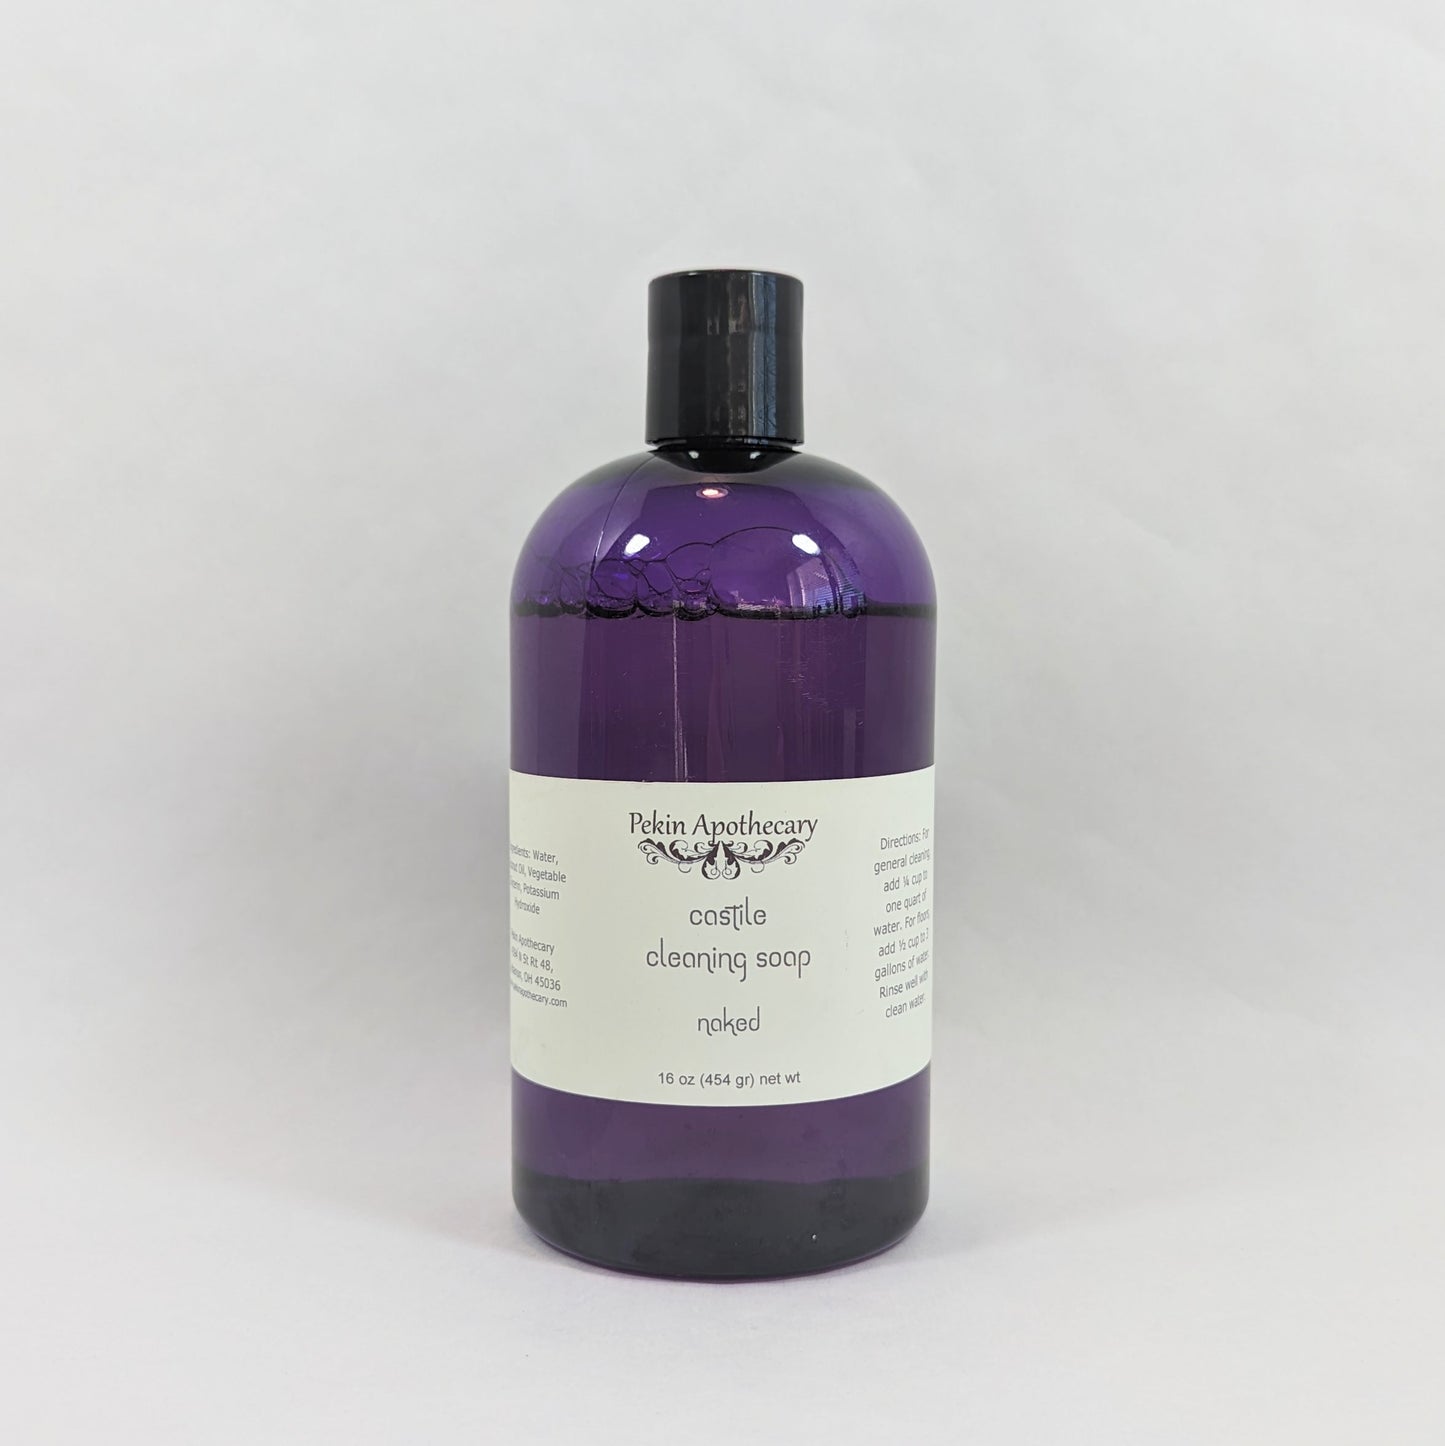 Castile Cleaning Soap - Naked